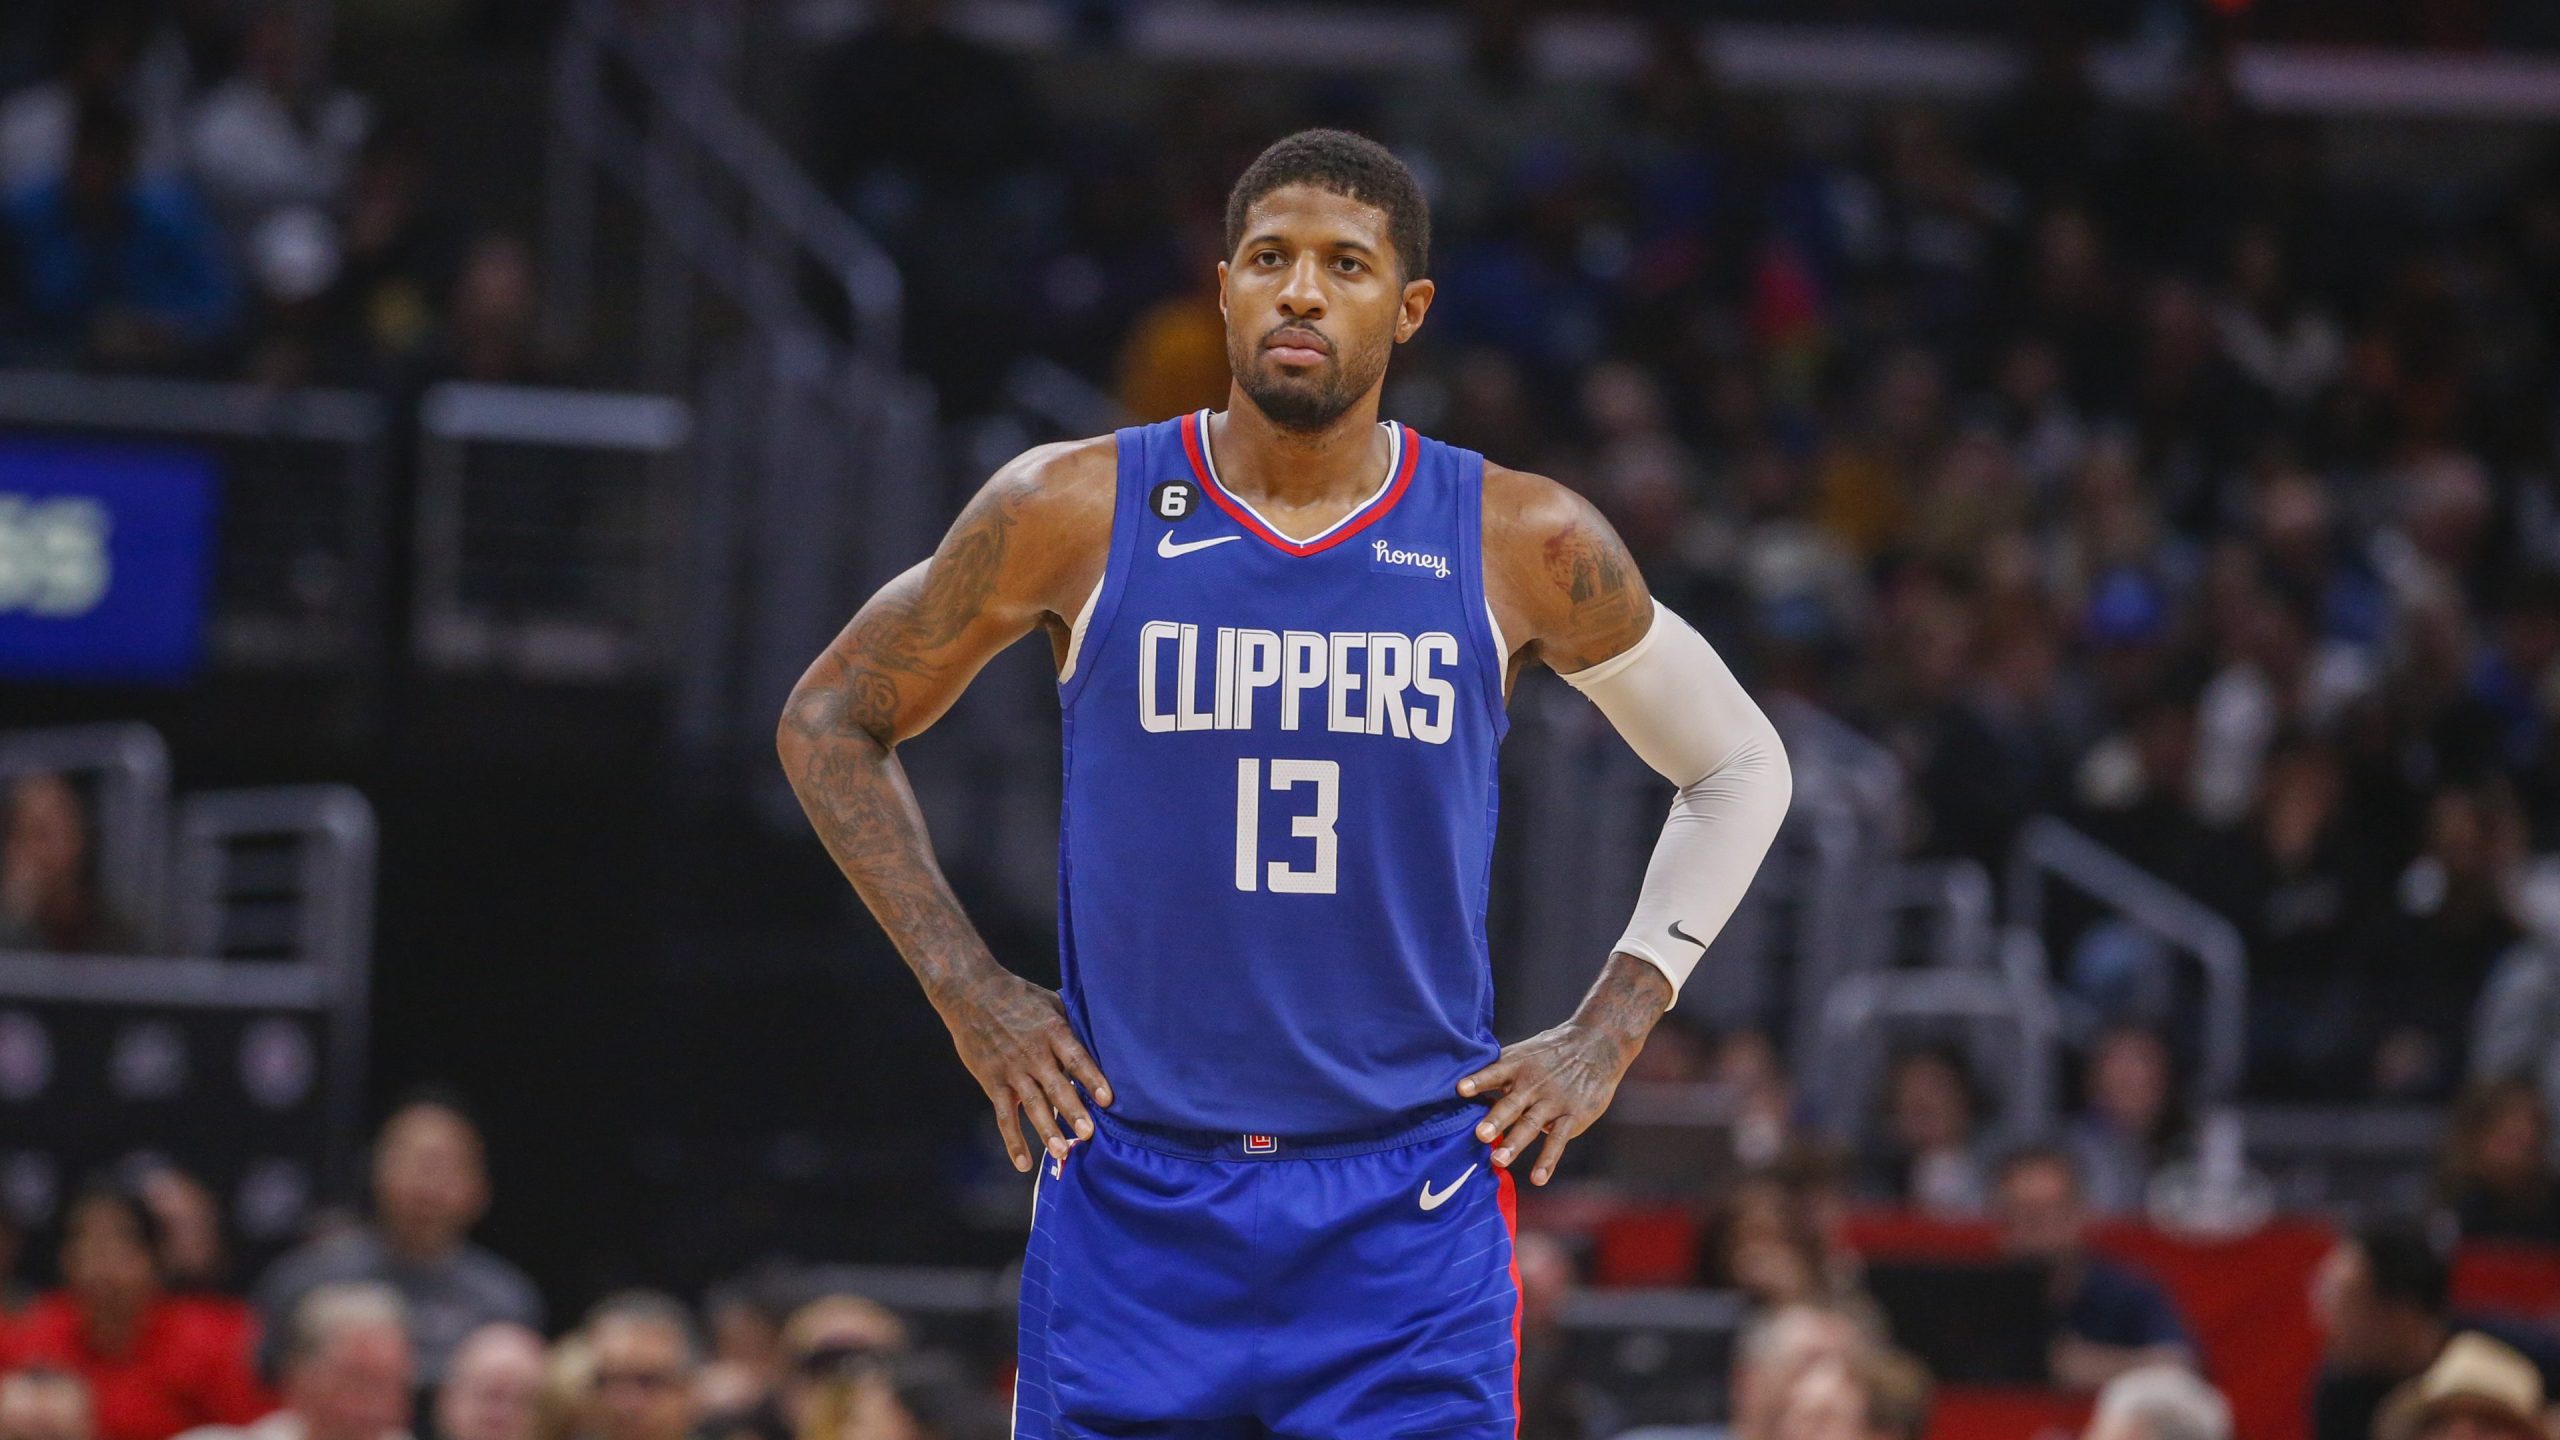 Breaking News: Heat Lands NBA Star Paul George in Huge Trade Deal with Clippers!